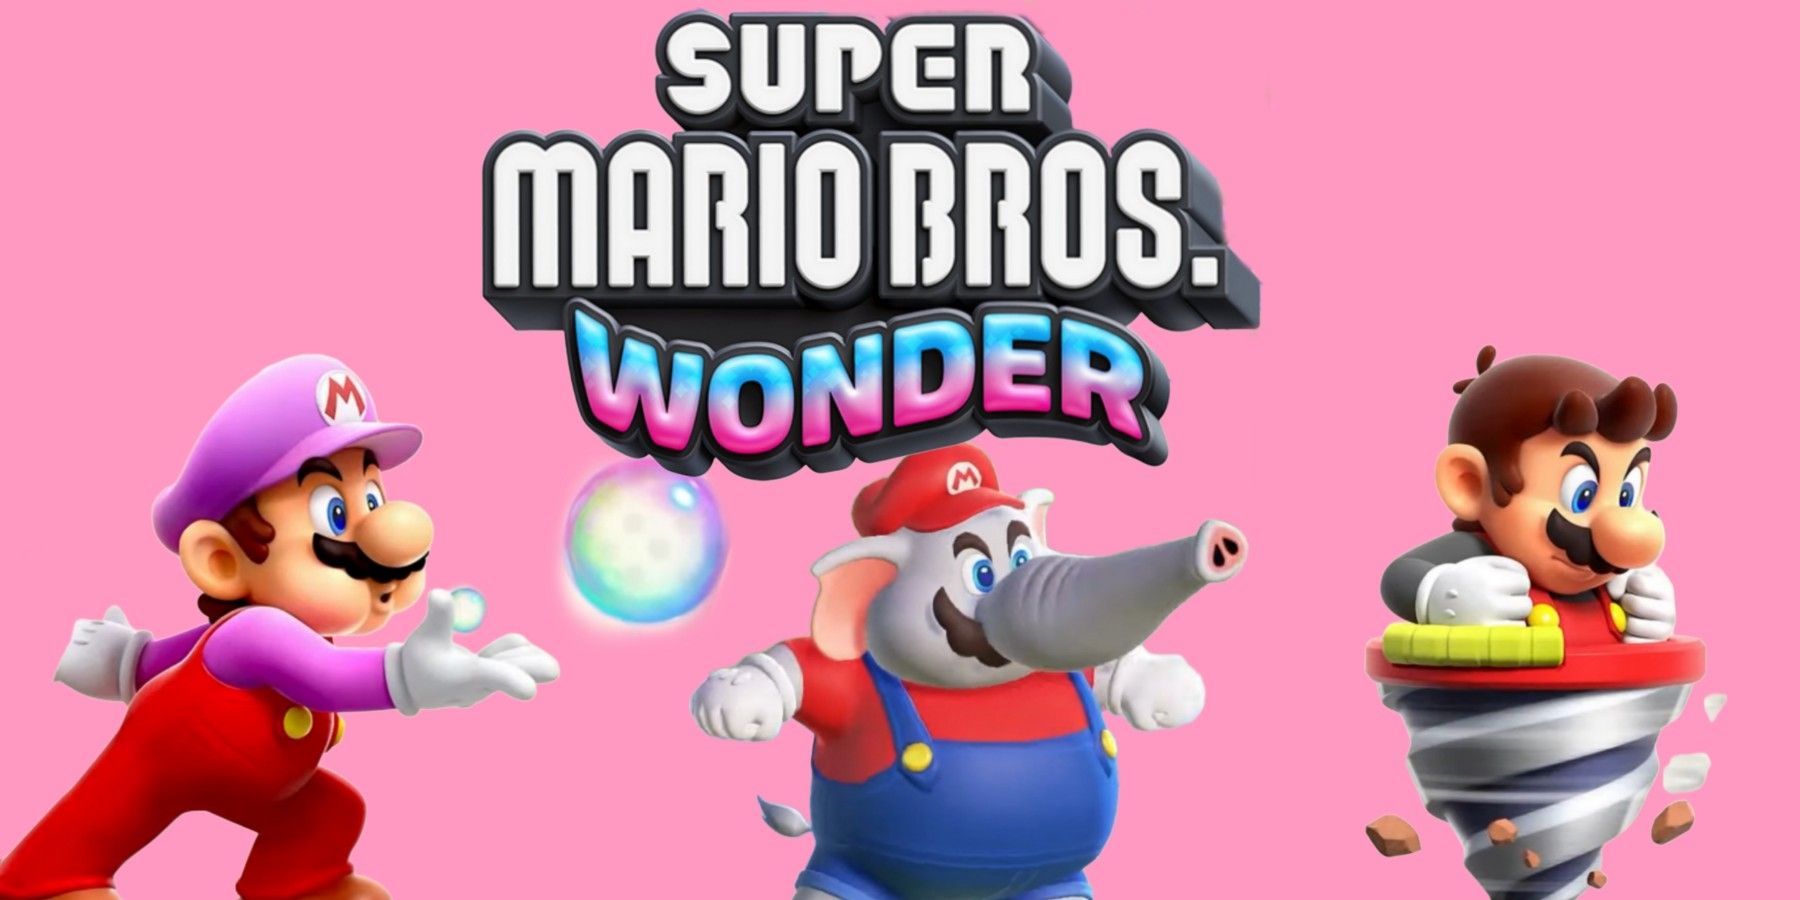 All New Power-Ups Confirmed for Super Mario Bros Wonder